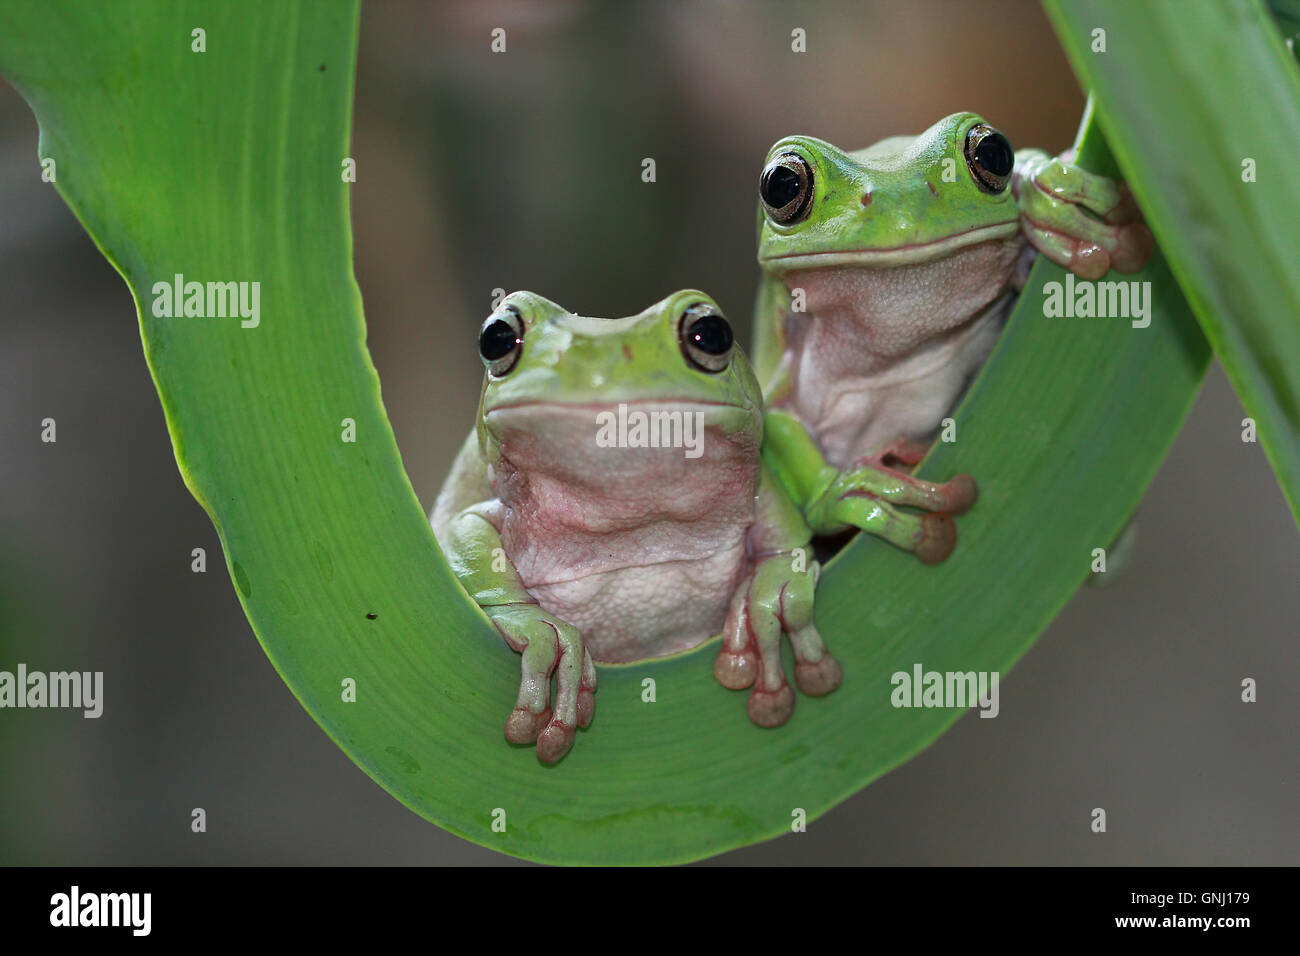 Two javan gliding tree frogs sitting side by side, Indonesia Stock Photo